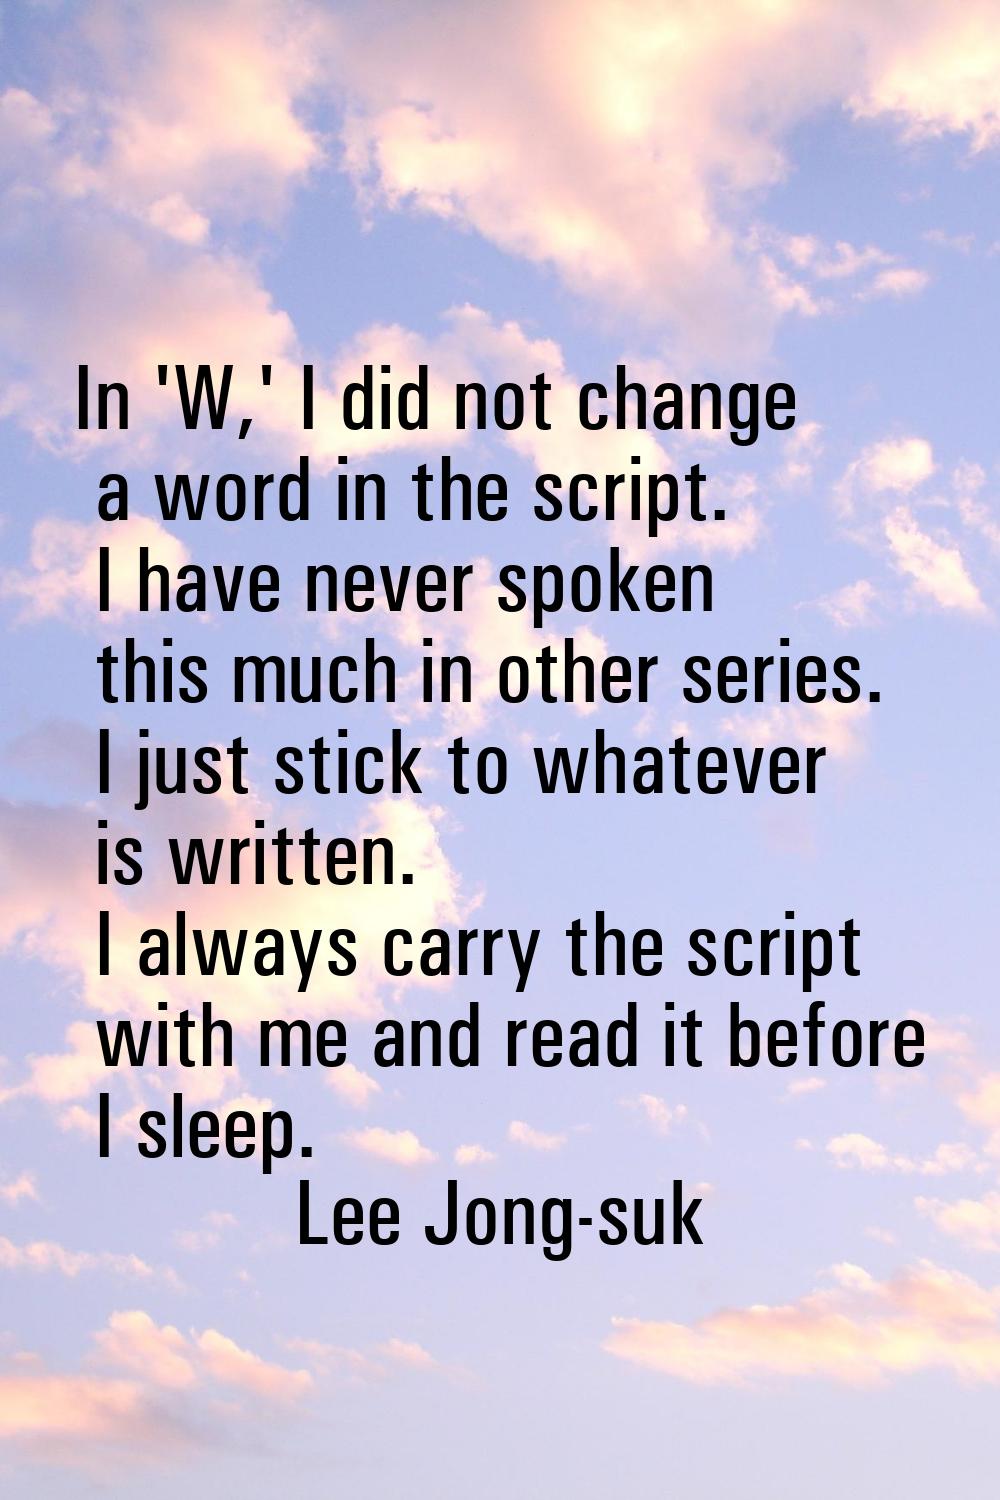 In 'W,' I did not change a word in the script. I have never spoken this much in other series. I jus